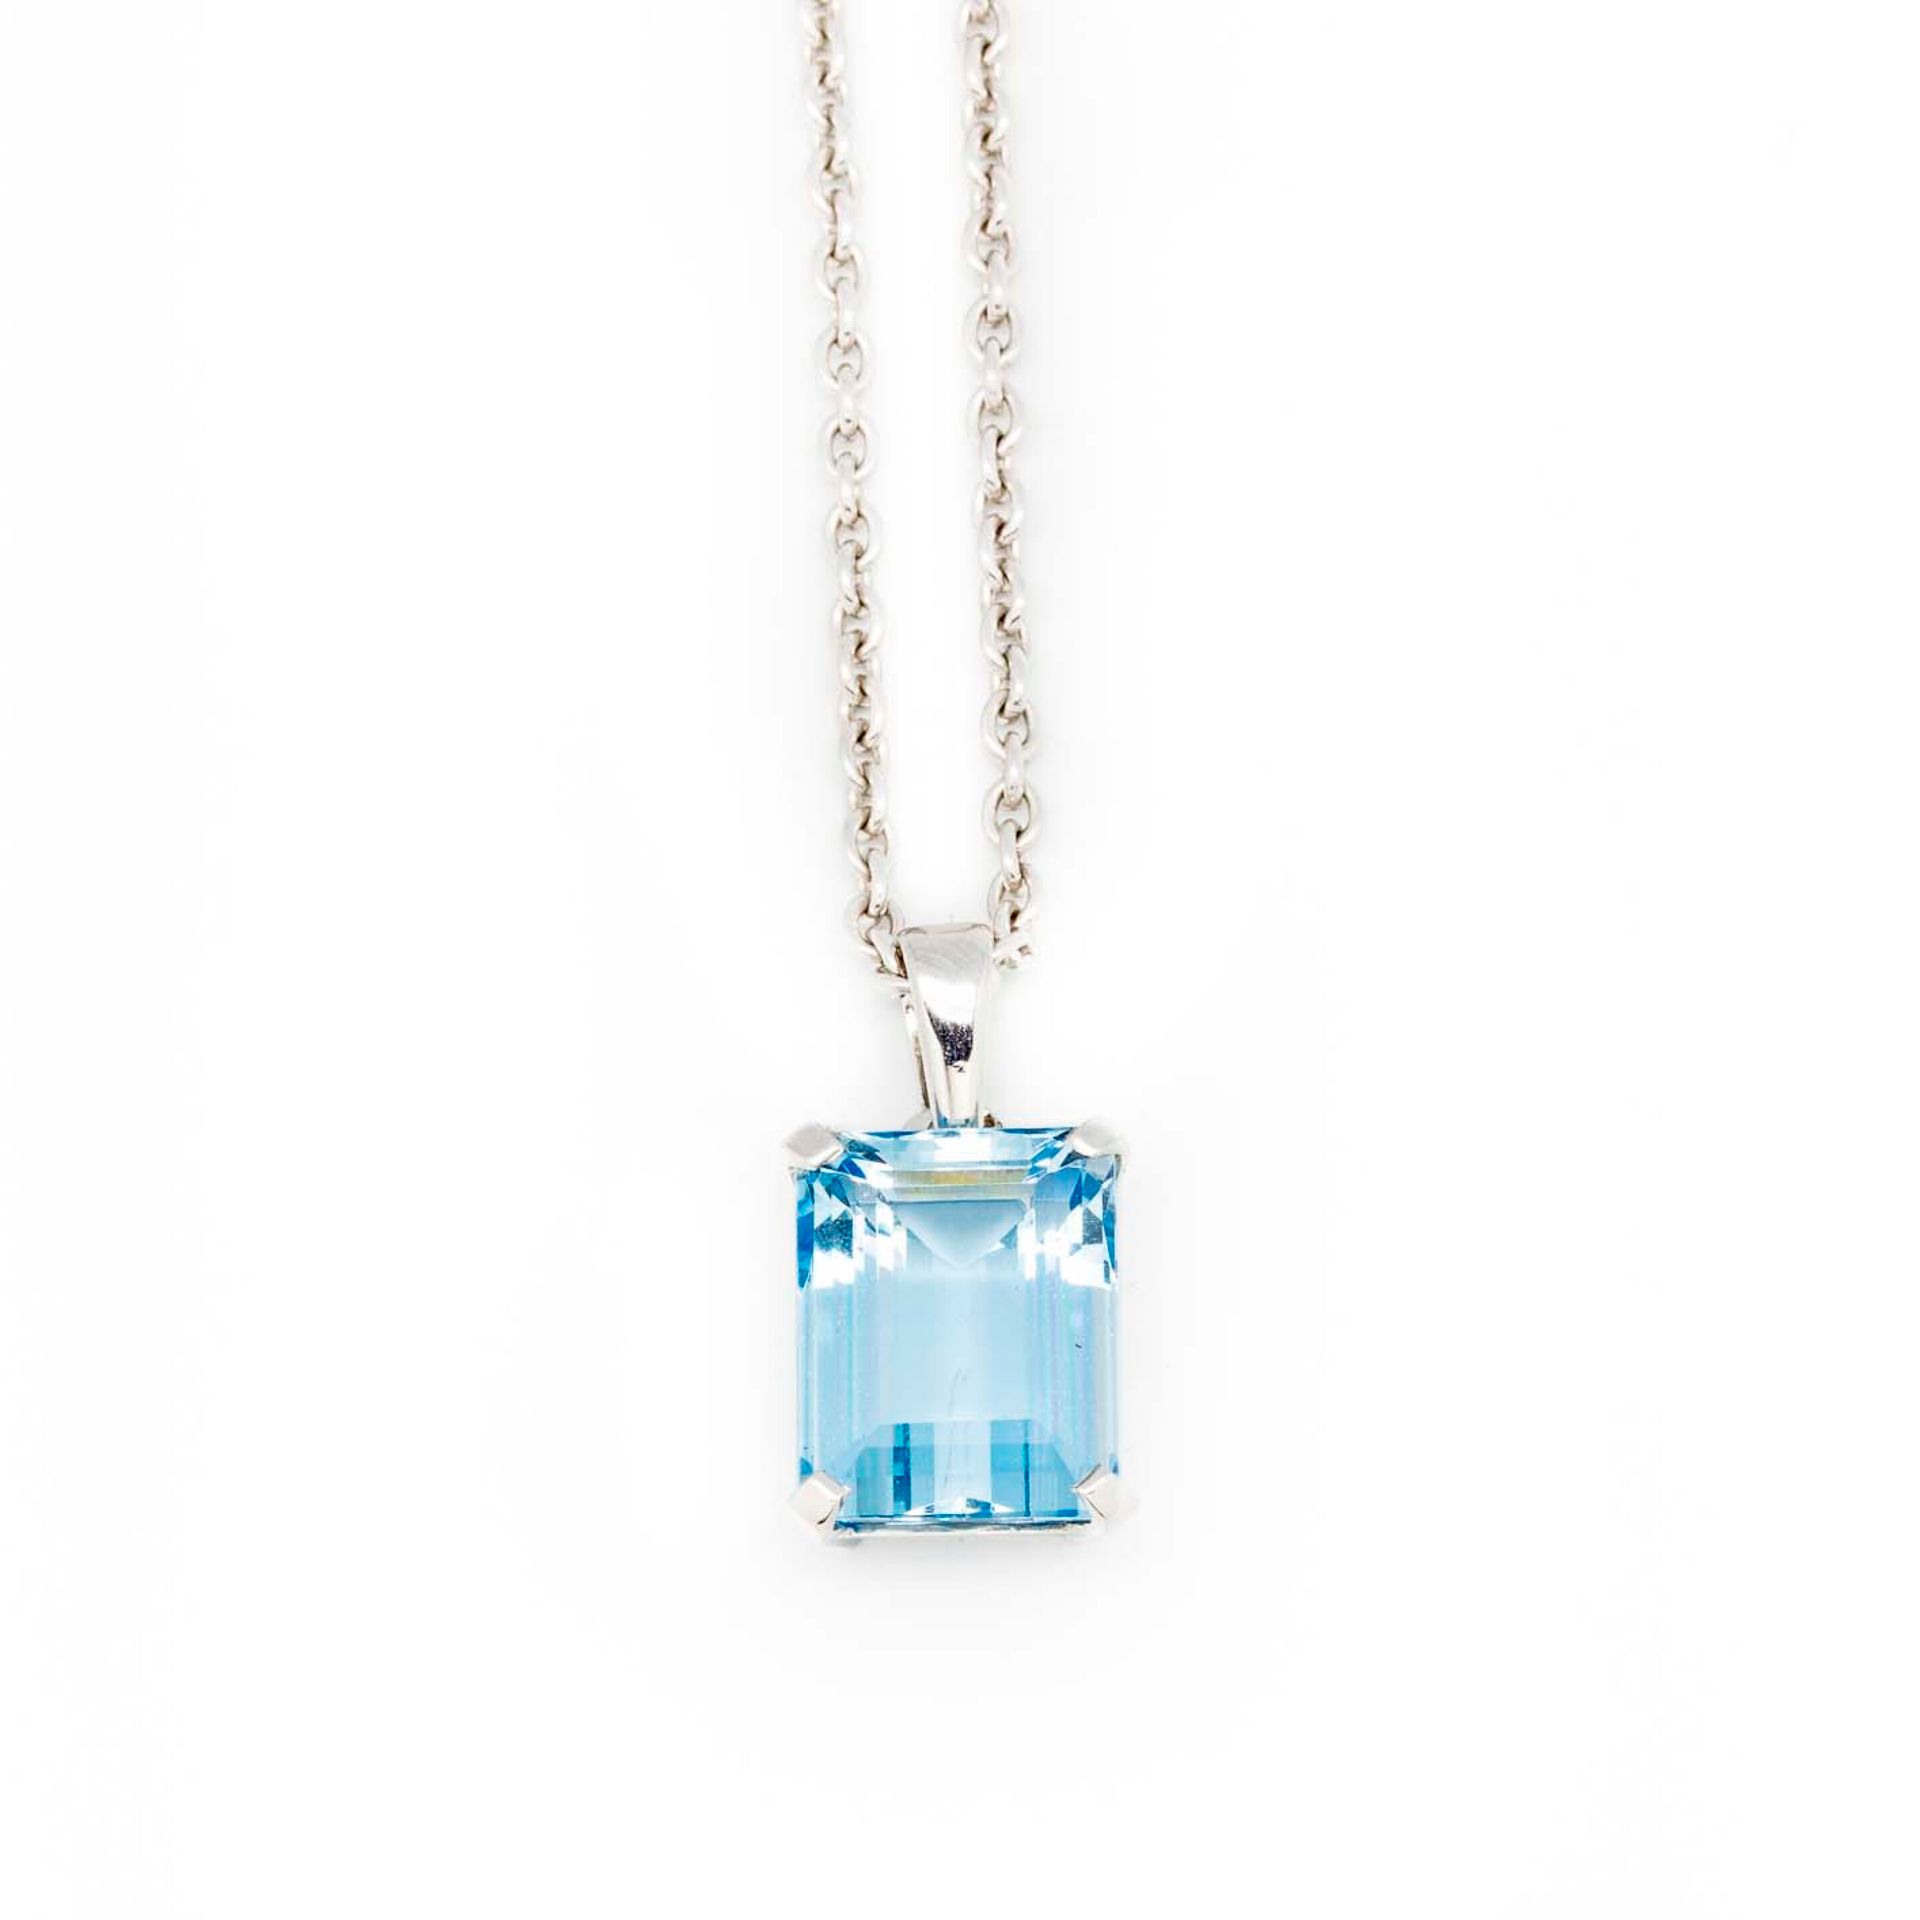 Null Beautiful pendant with an aquamarine and a white gold chain

Gross weight: &hellip;